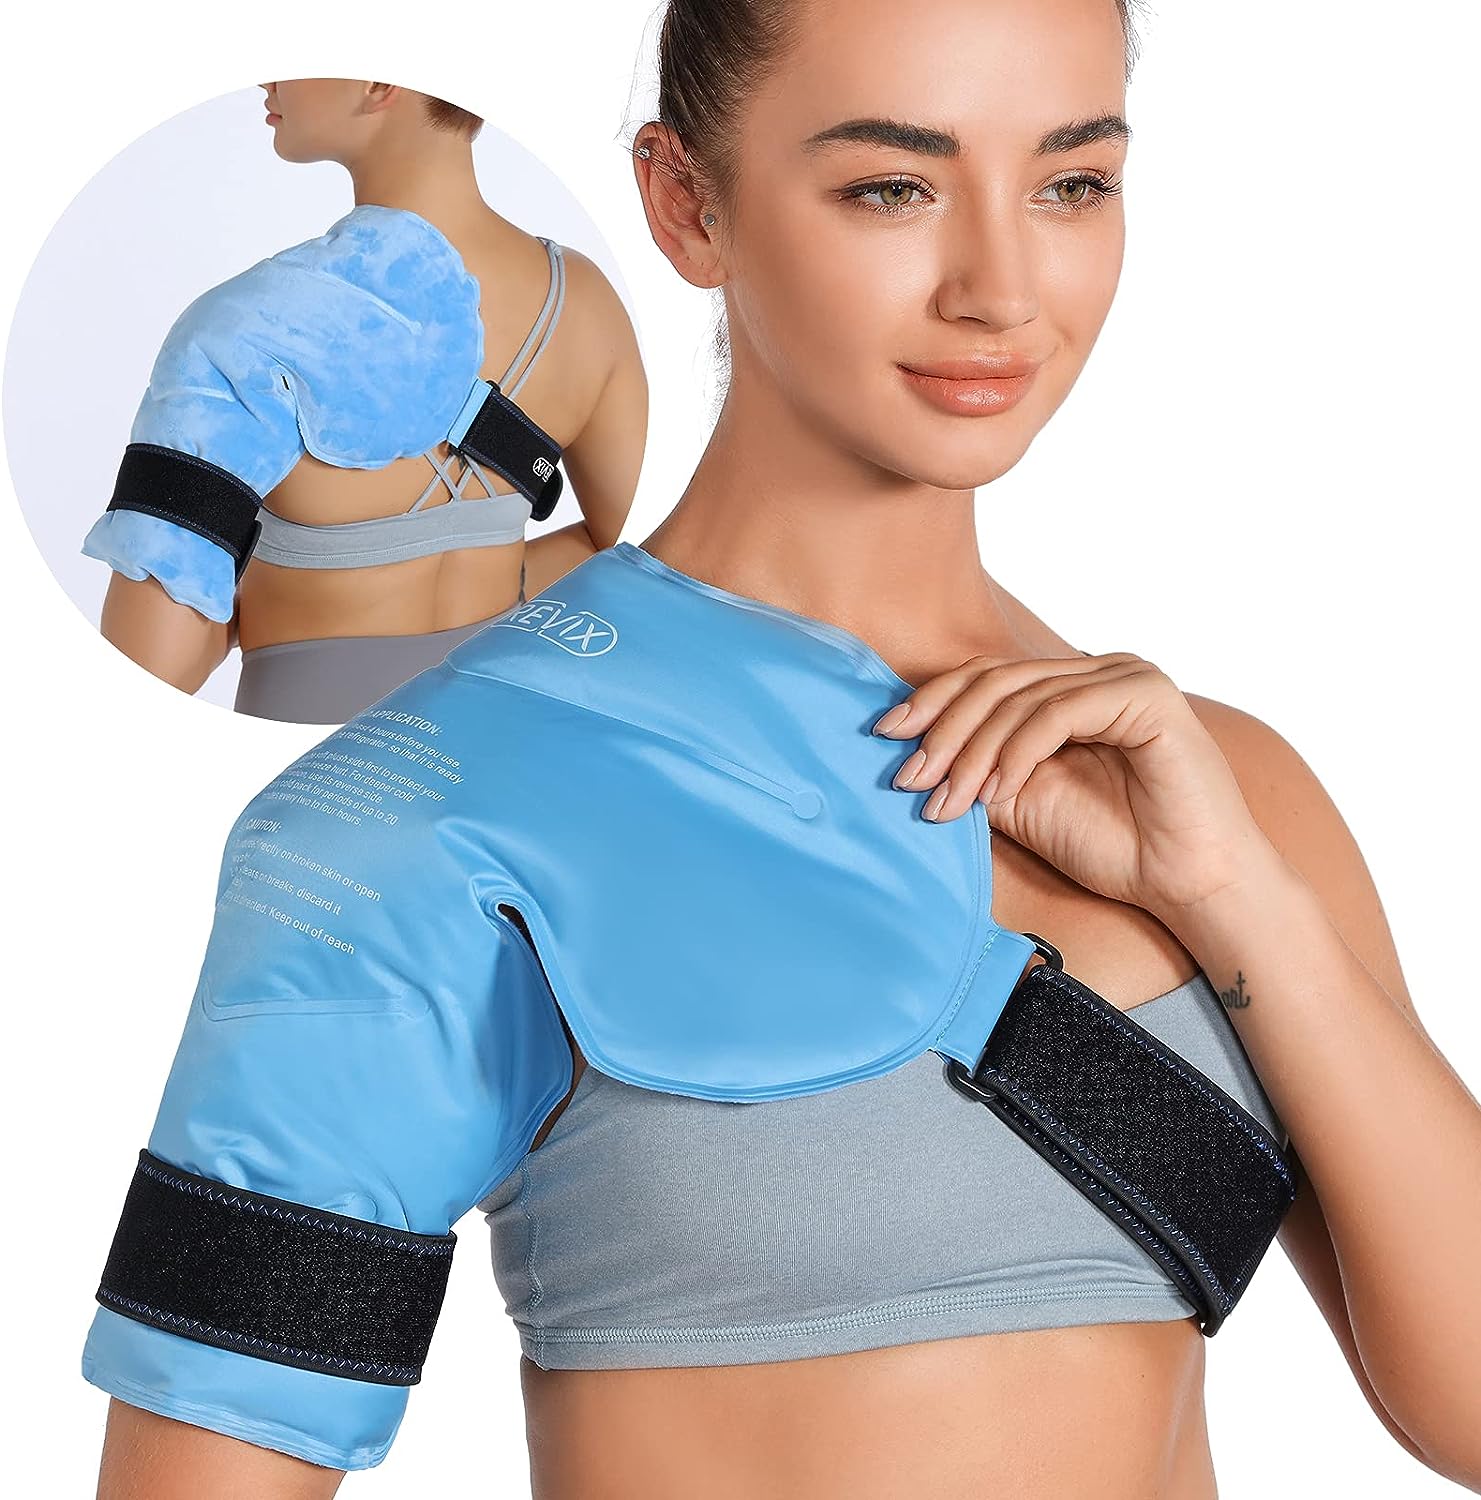 Review of REVIX Shoulder Ice Pack Rotator Cuff Cold Therapy Wraps